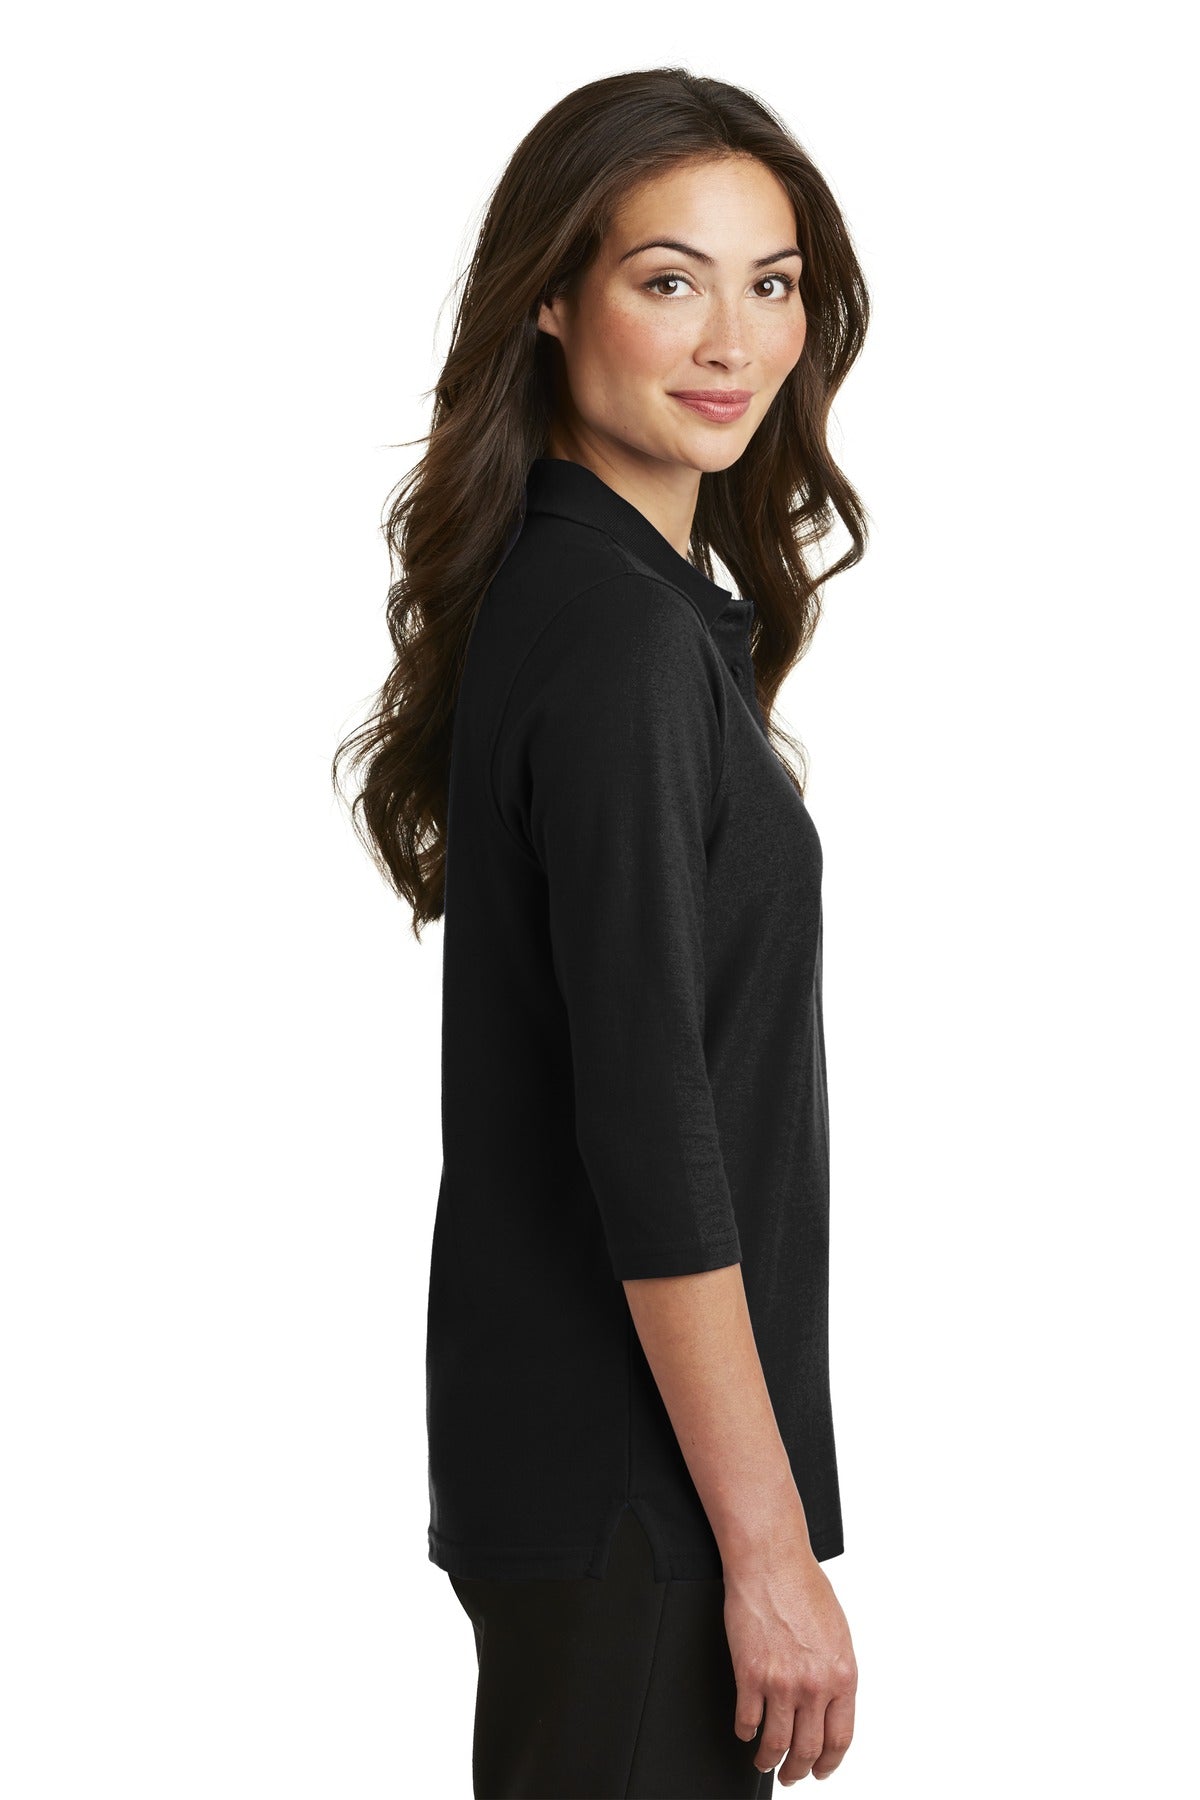 Ladies Silk Touch™ 3/4-Sleeve Polo. L562